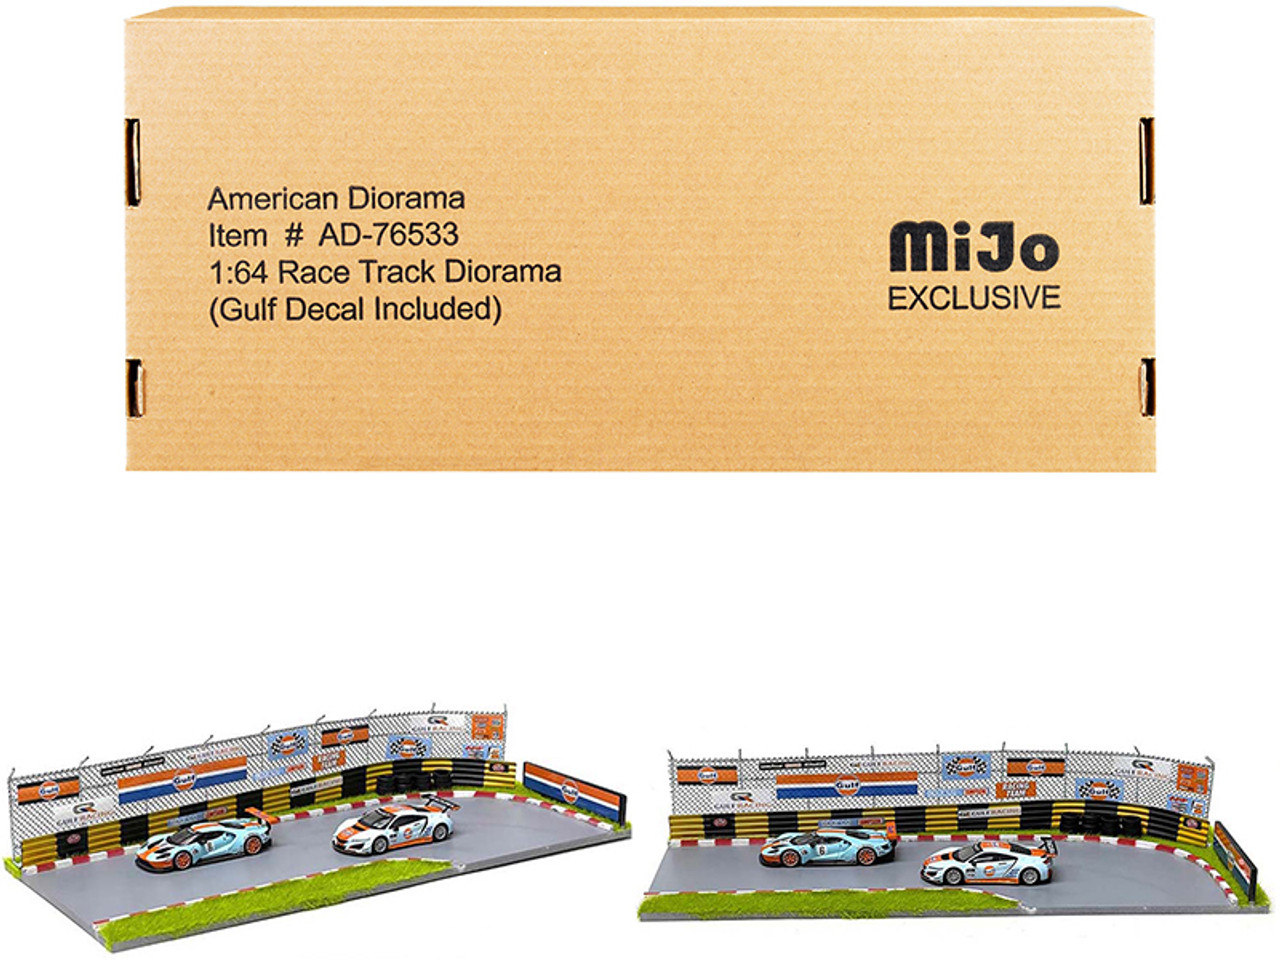 Garage Diorama with Decals for 1/64 Scale Models by American Diorama 76530